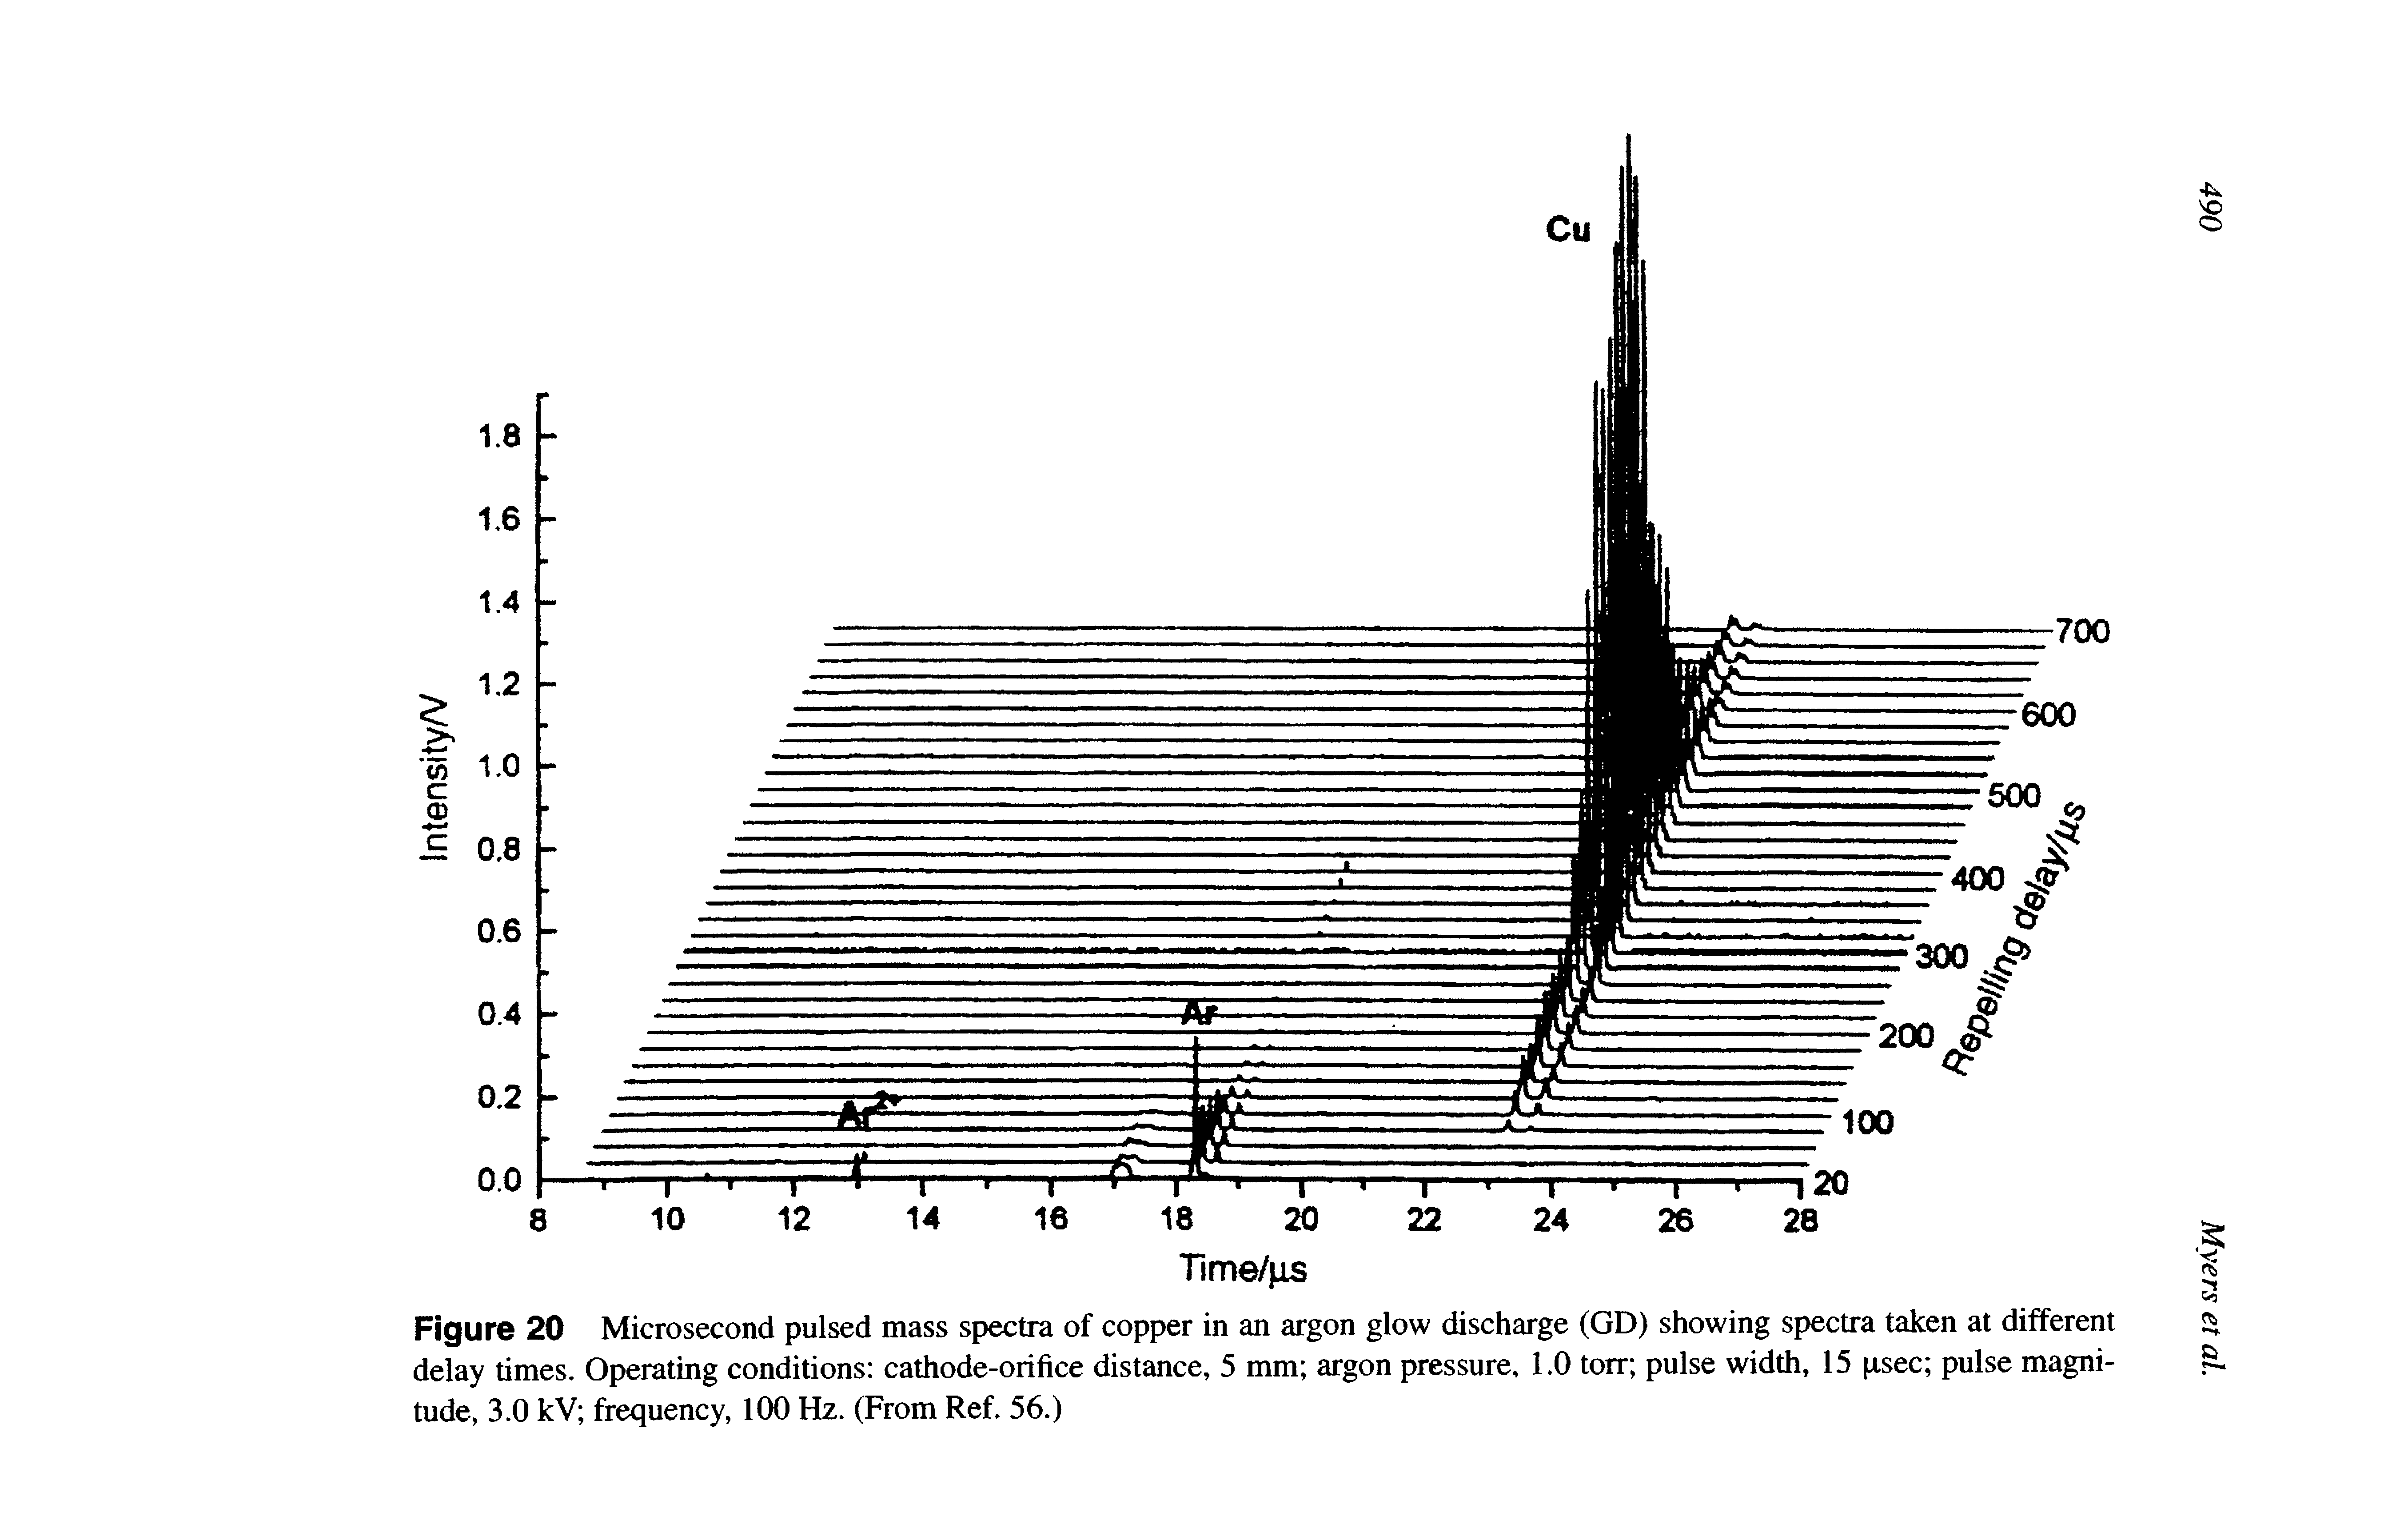 Figure 20 Microsecond pulsed mass spectra of copper in an argon glow discharge (GD) showing spectra taken at different delay times. Operating conditions cathode-orifice distance, 5 mm argon pressure, 1.0 torr pulse width, 15 psec pulse magnitude, 3.0 kV frequency, 100 Hz. (From Ref. 56.)...